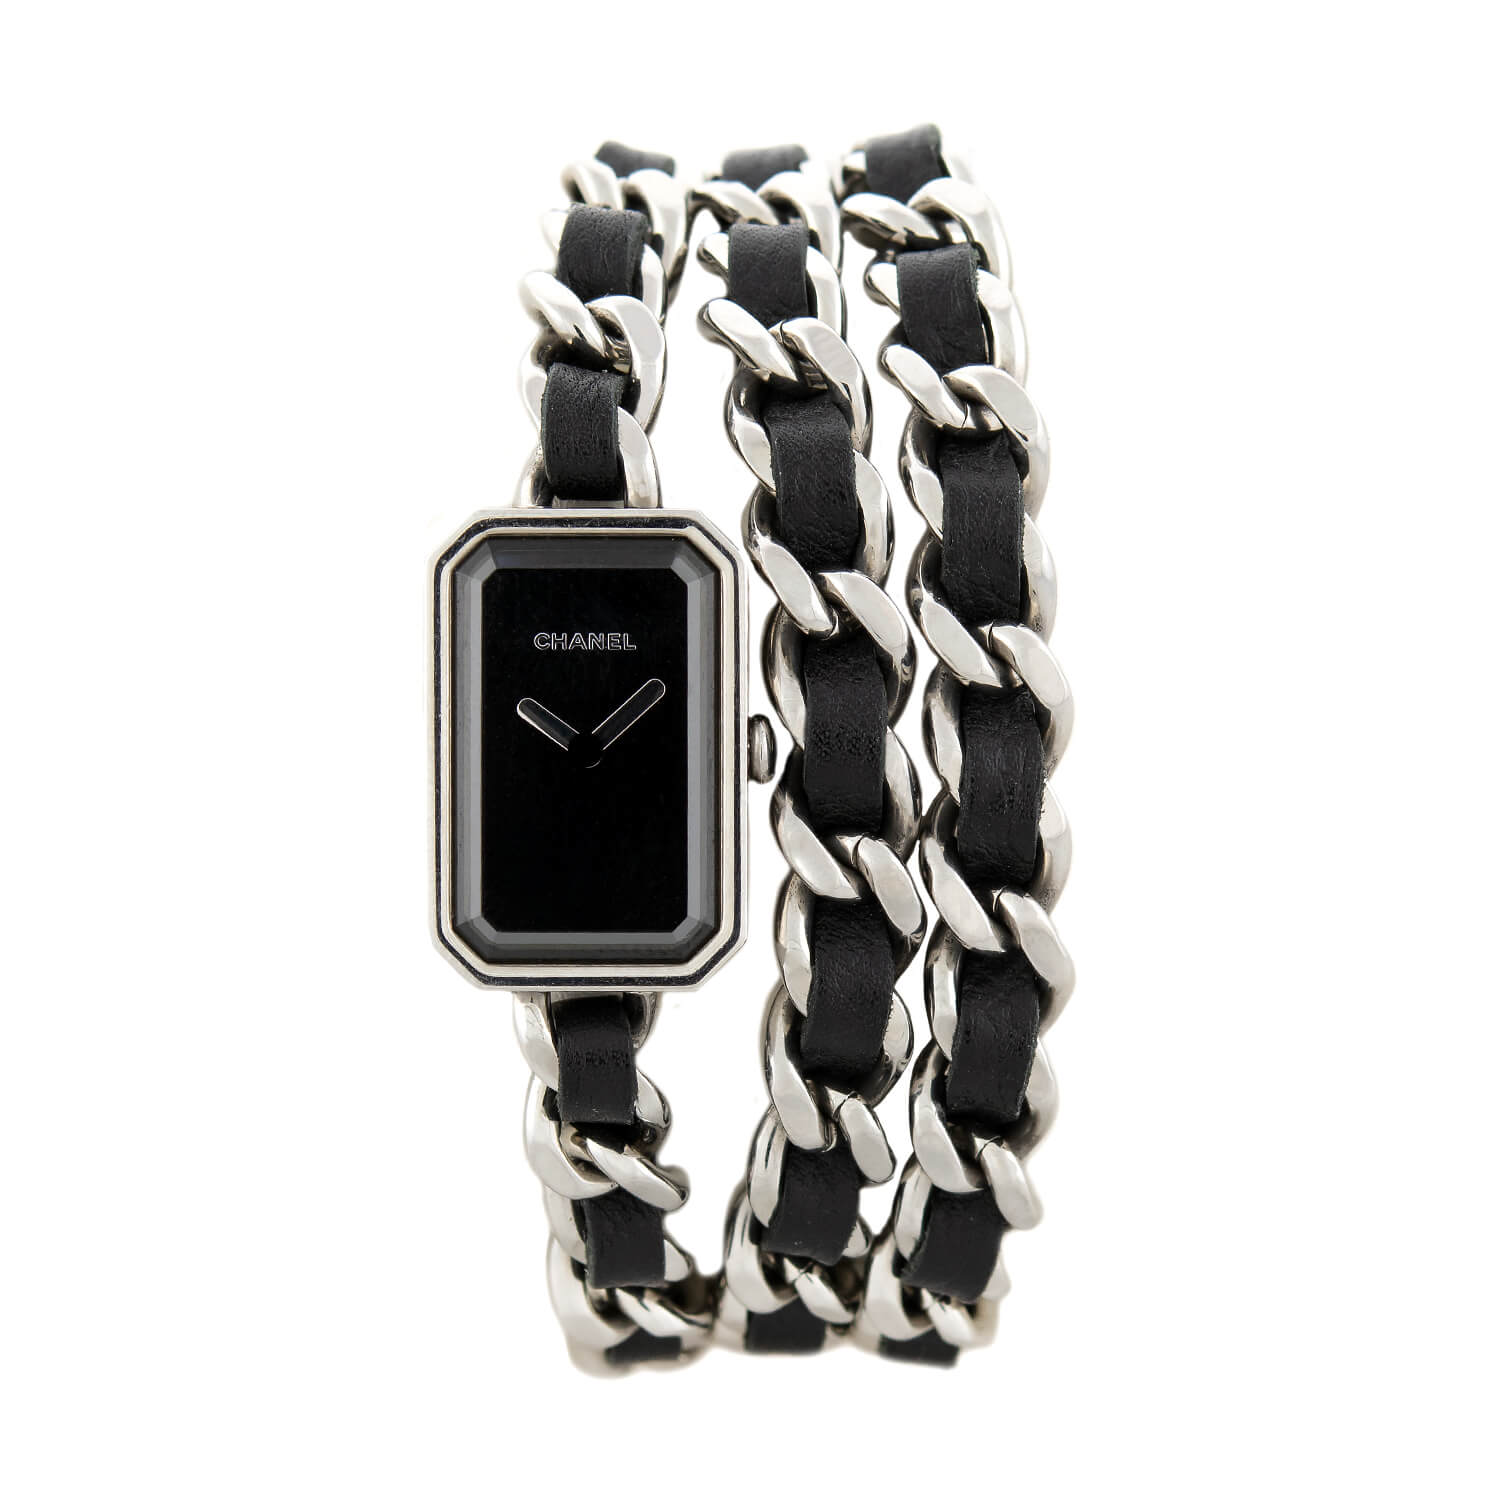 Estate Chanel Première Iconic Stainless Steel Chain + Leather Wrap Watch by A. Brandt + Son